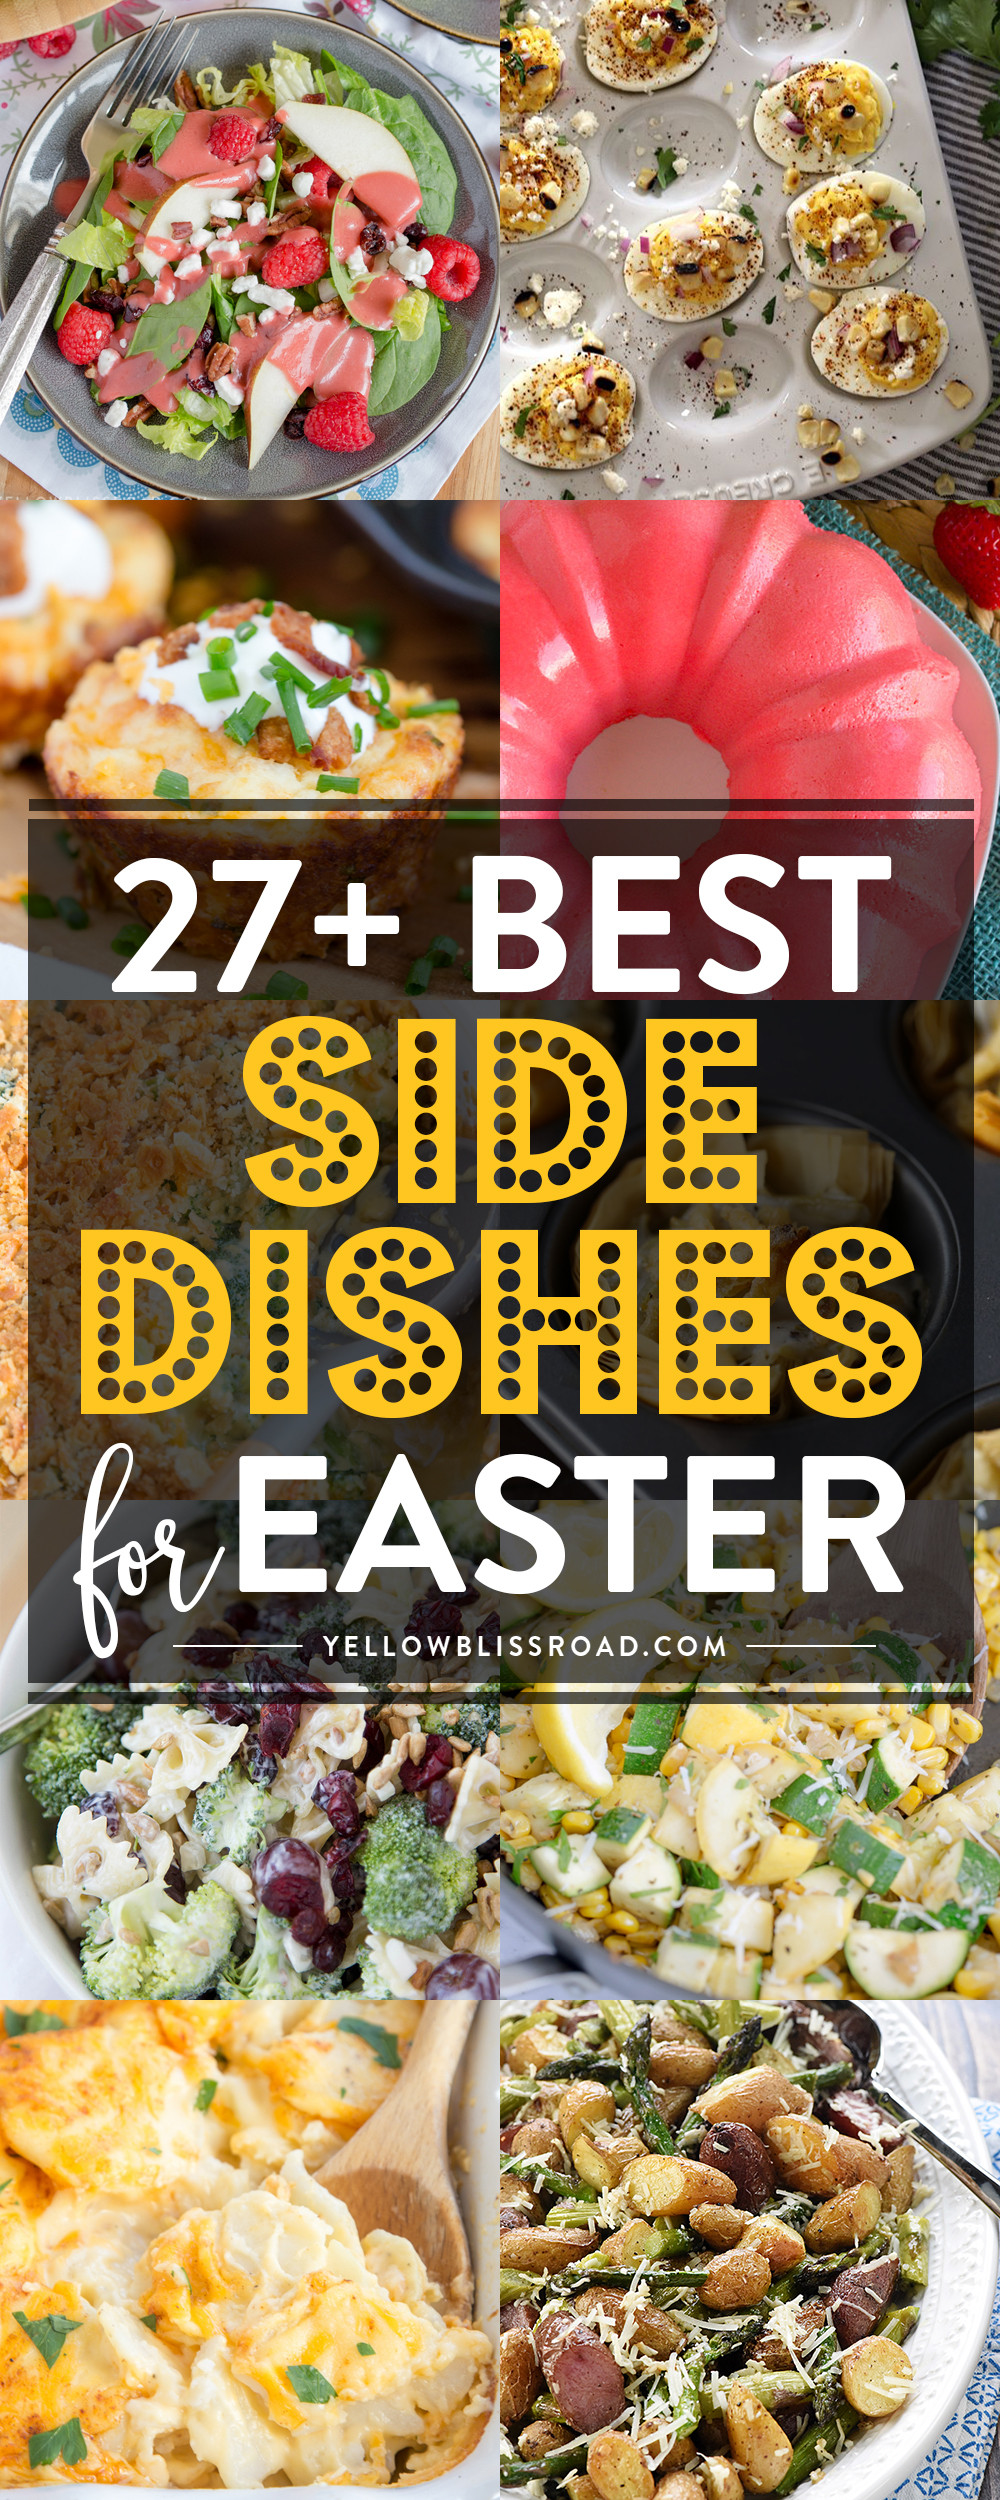 The 30 Best Ideas for Easter Brunch Side Dishes - Home ...